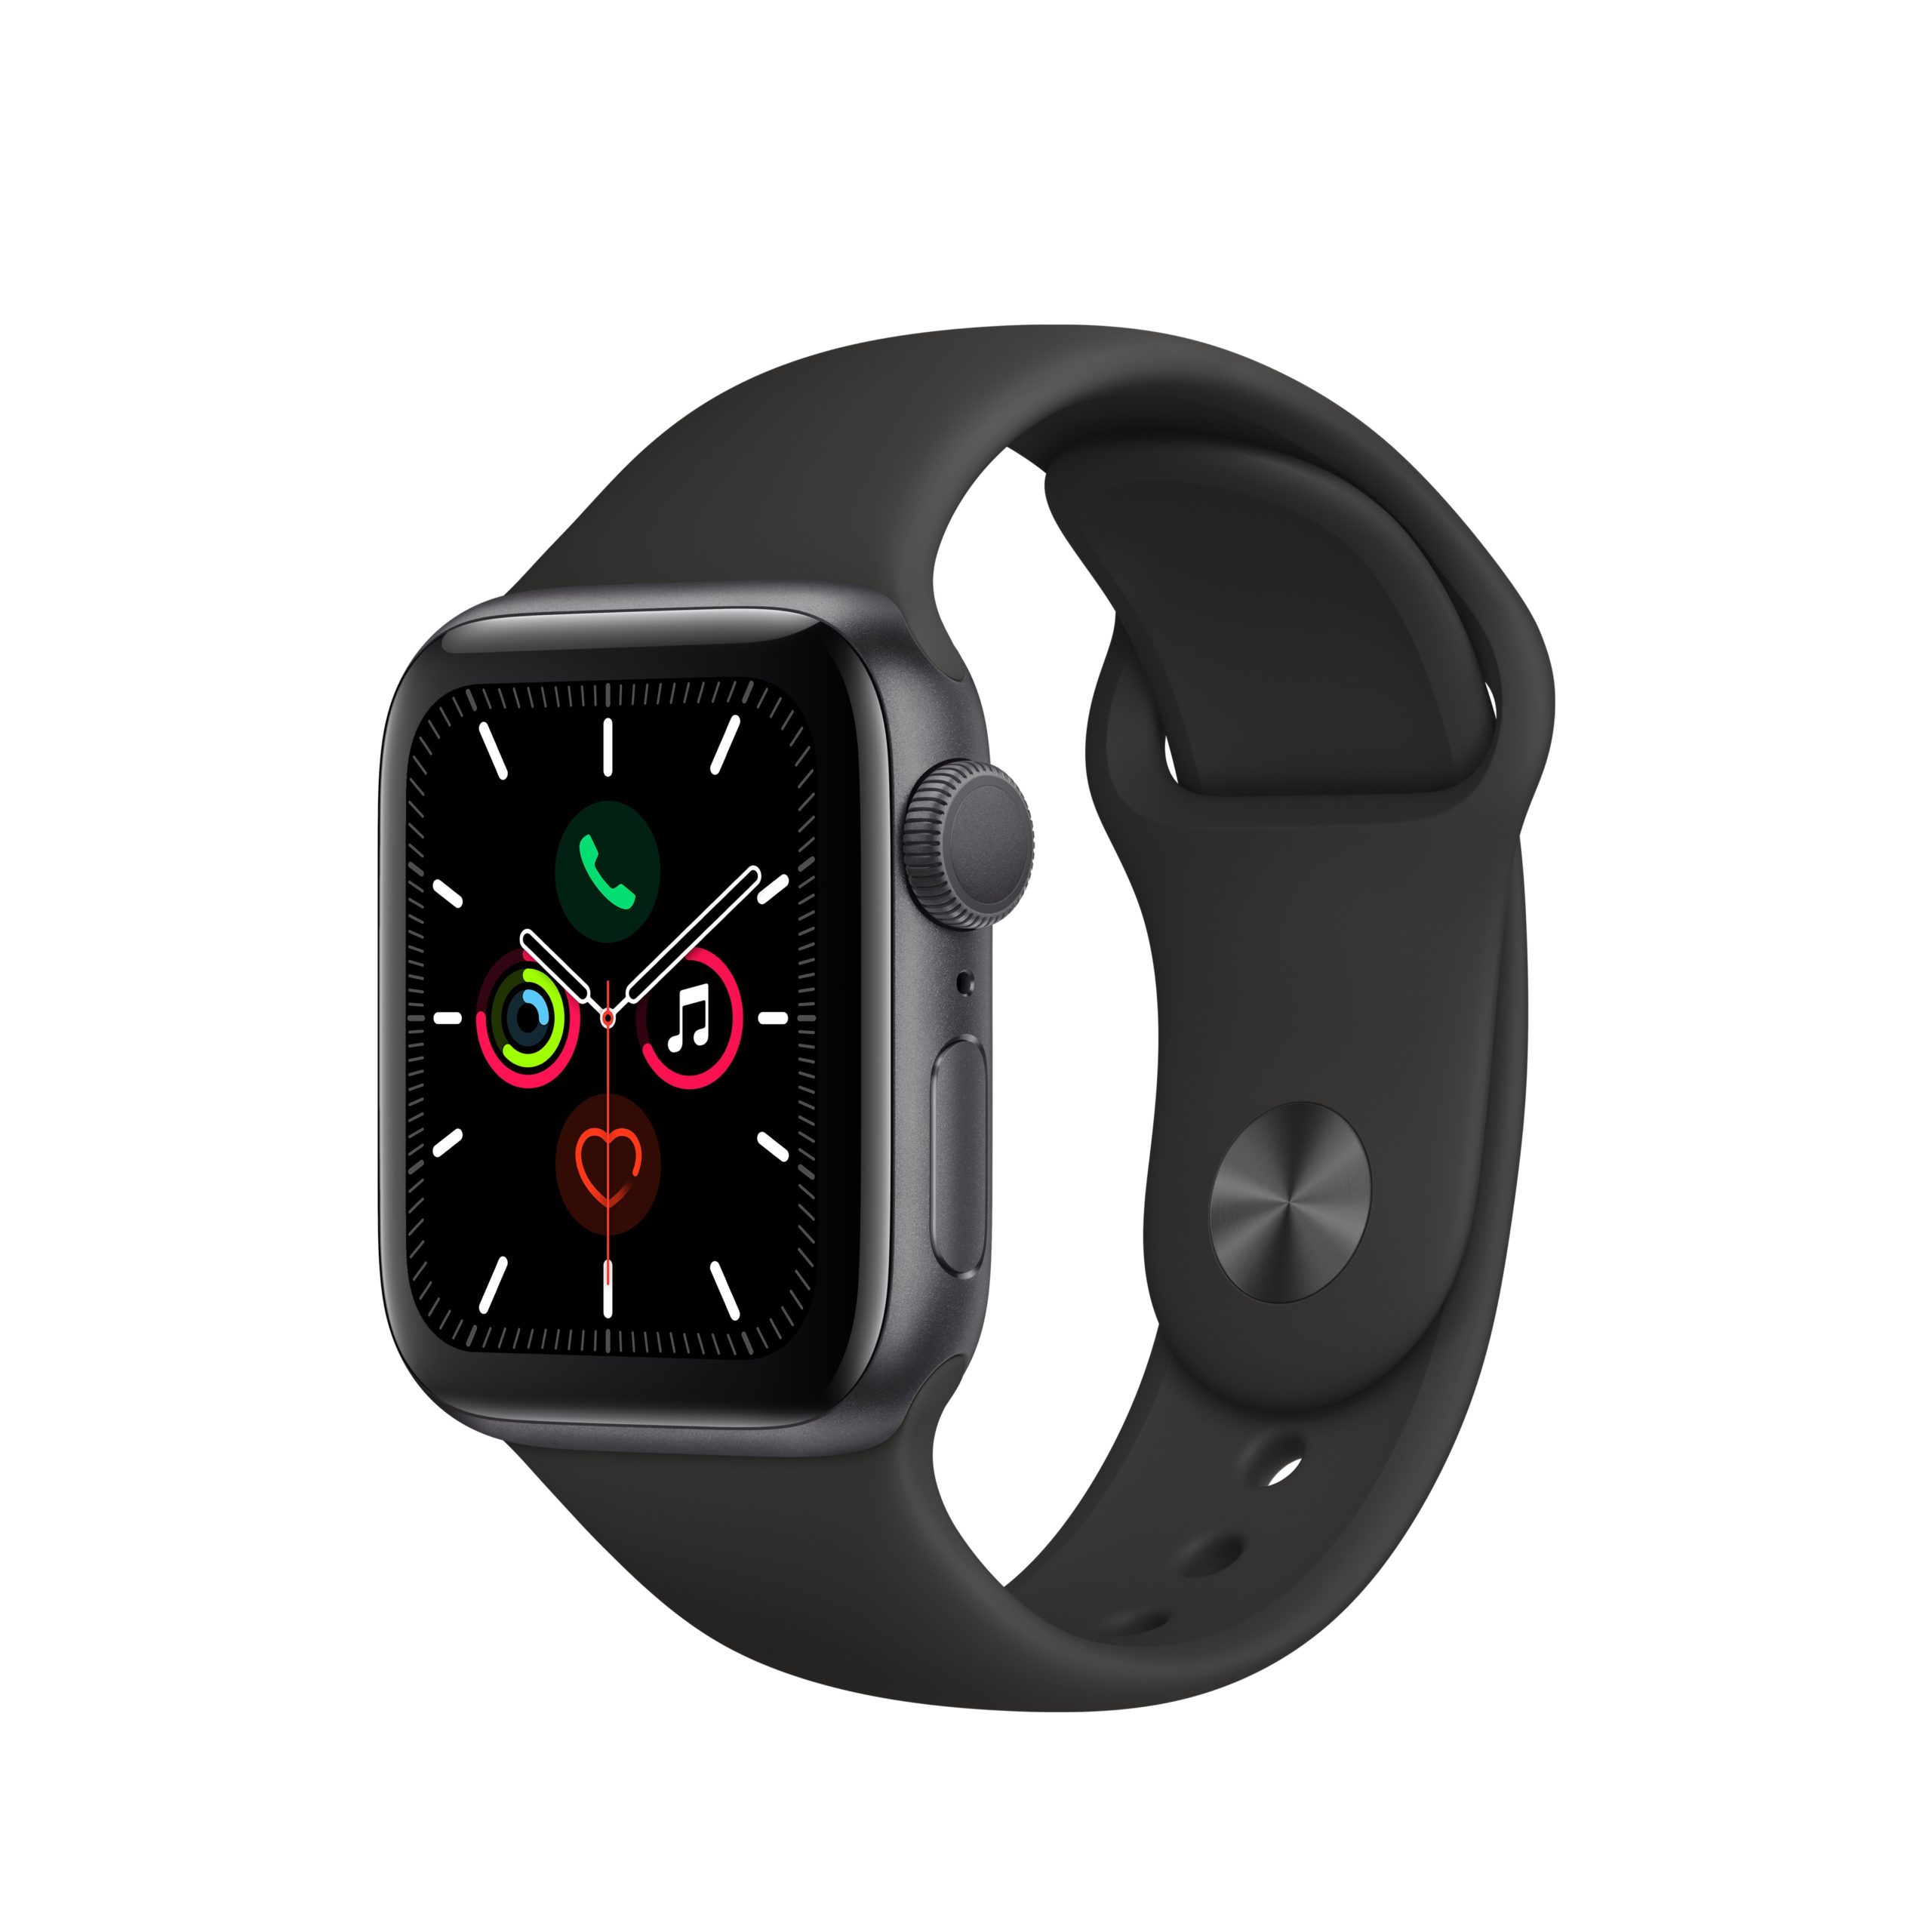 Apple Watch Series 5 GPS, 40mm Space Gray Aluminum Case with Black Sport Band - S/M & M/L 2